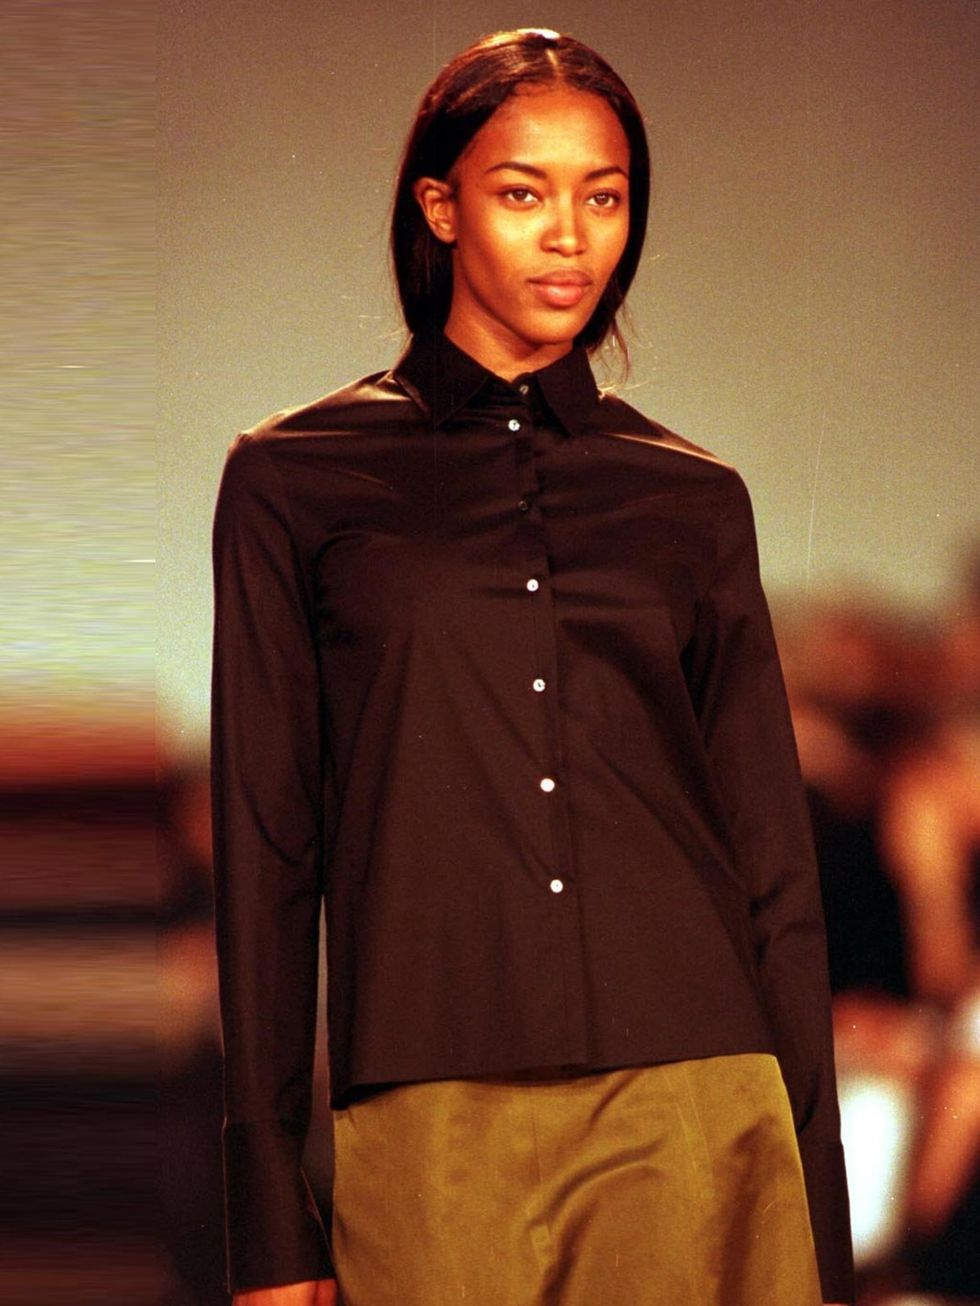 <p><a href="http://www.elleuk.com/star-style/celebrity-style-files/naomi-campbell">Naomi Campbell</a> on the catwalk for Louis Vuitton Autumn/ Winter 1998 collection, Paris Fashion Week 1998.</p><p><a href="http://www.elleuk.com/star-style/celebrity-style